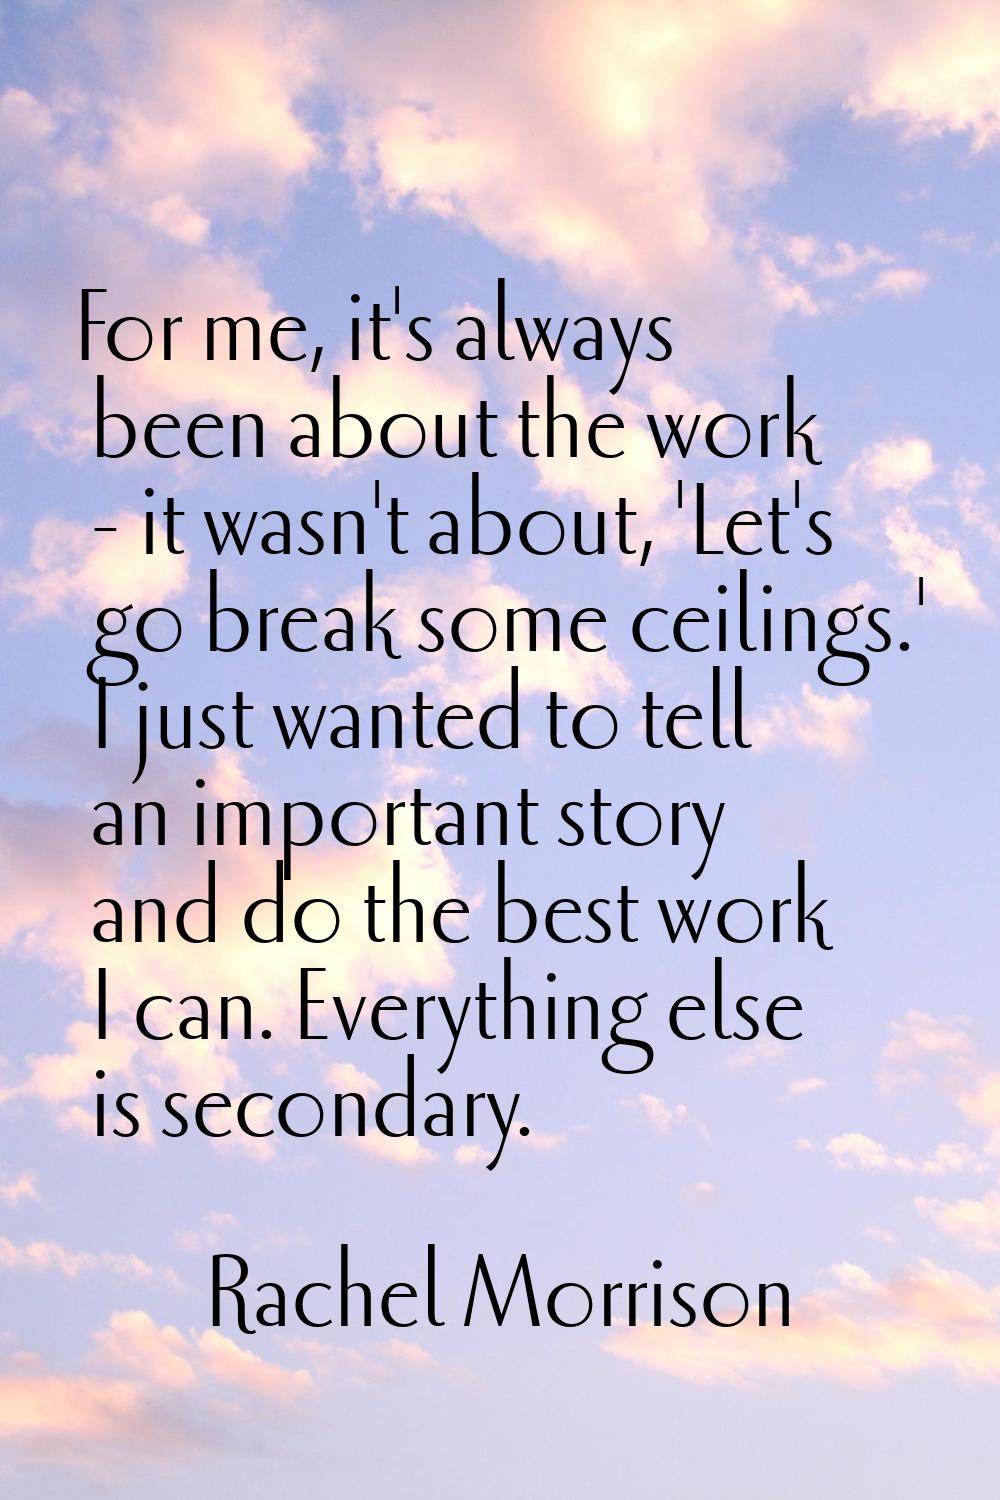 For me, it's always been about the work - it wasn't about, 'Let's go break some ceilings.' I just w